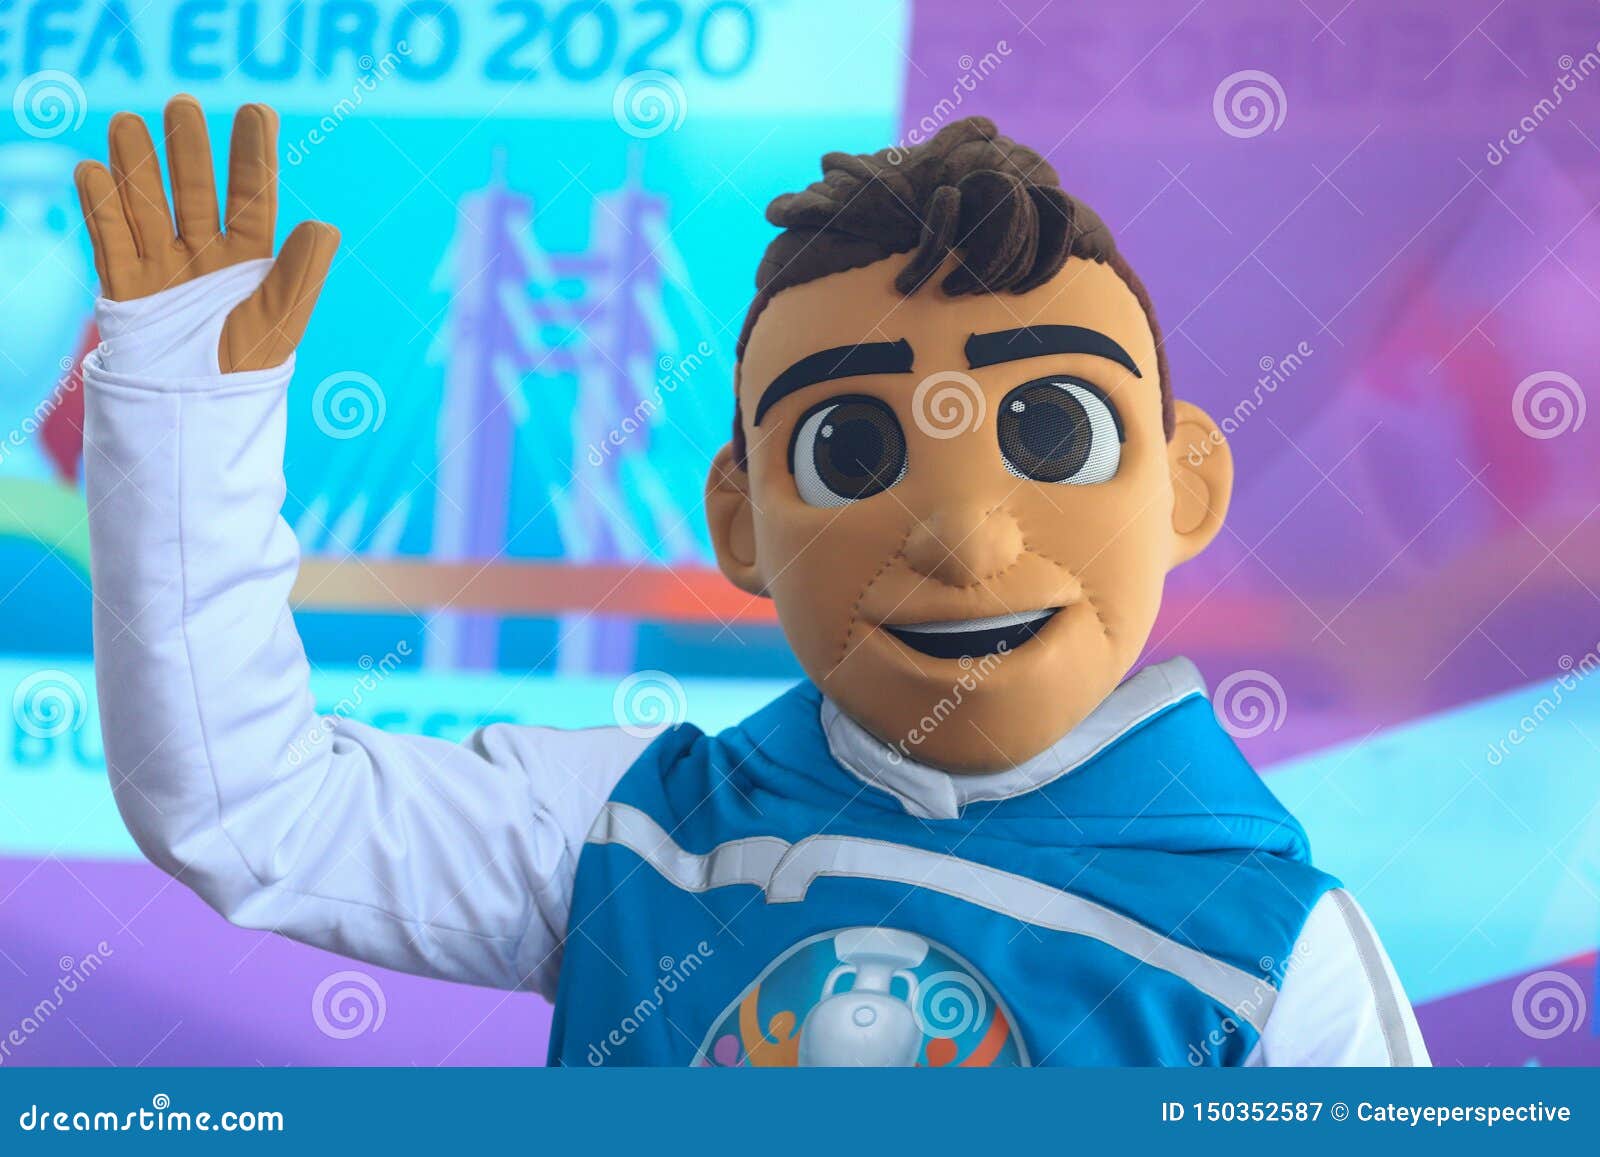 Skillzy, the Official Mascot for the Euro 2020 Football Tournament, is